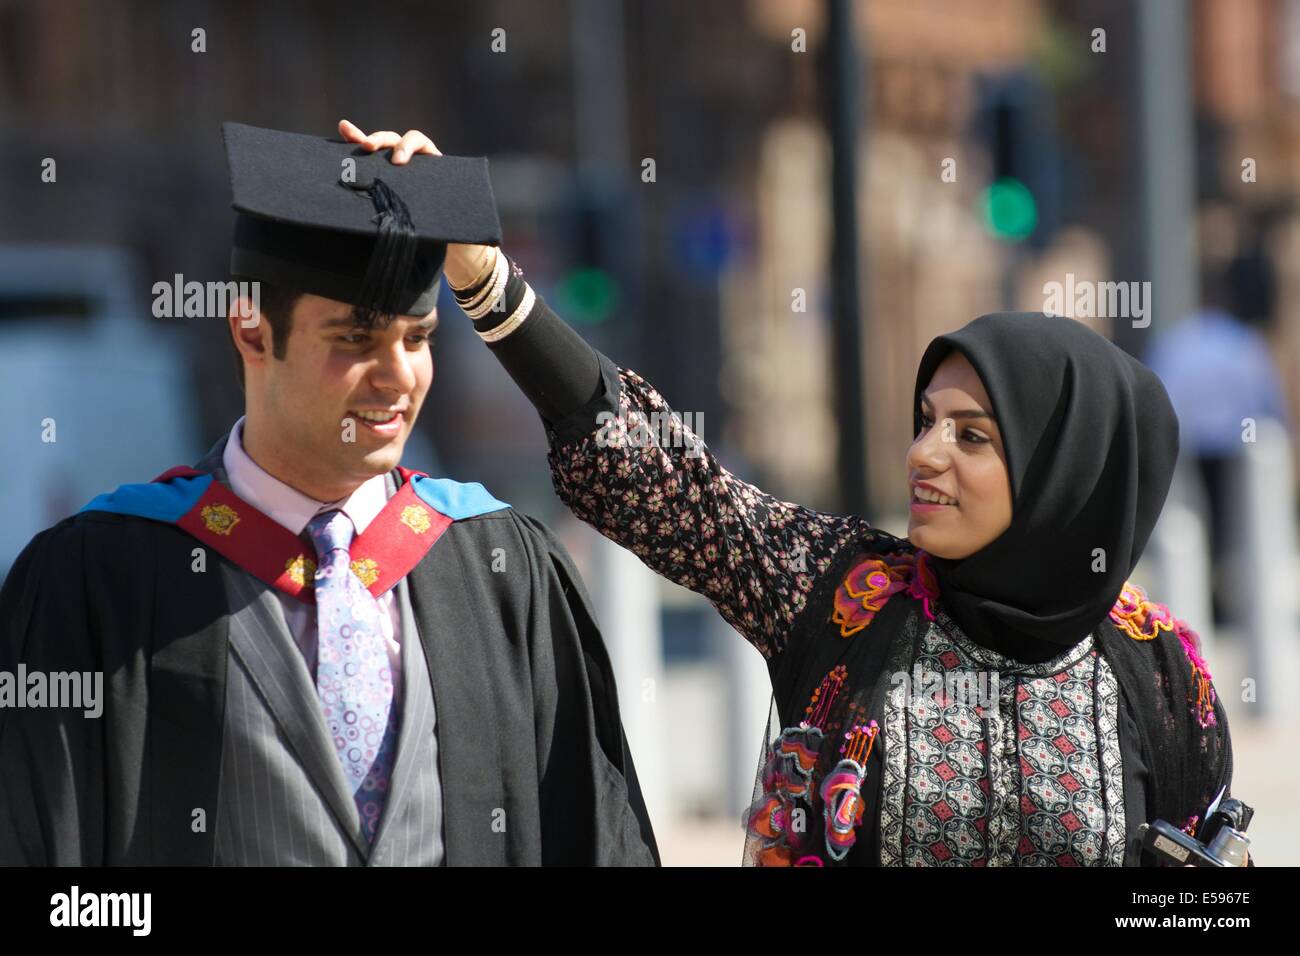 Manchester,  UK.  24th July, 2014. Mohammed Adel has his mortar board adjusted before entering The Bridgewater Hall to receive his B.Sc. in Business Information Technology, which he gained with First Class Honours. Graduation (Manchester Metropolitan University) Manchester, UK Credit:  John Fryer/Alamy Live News Stock Photo